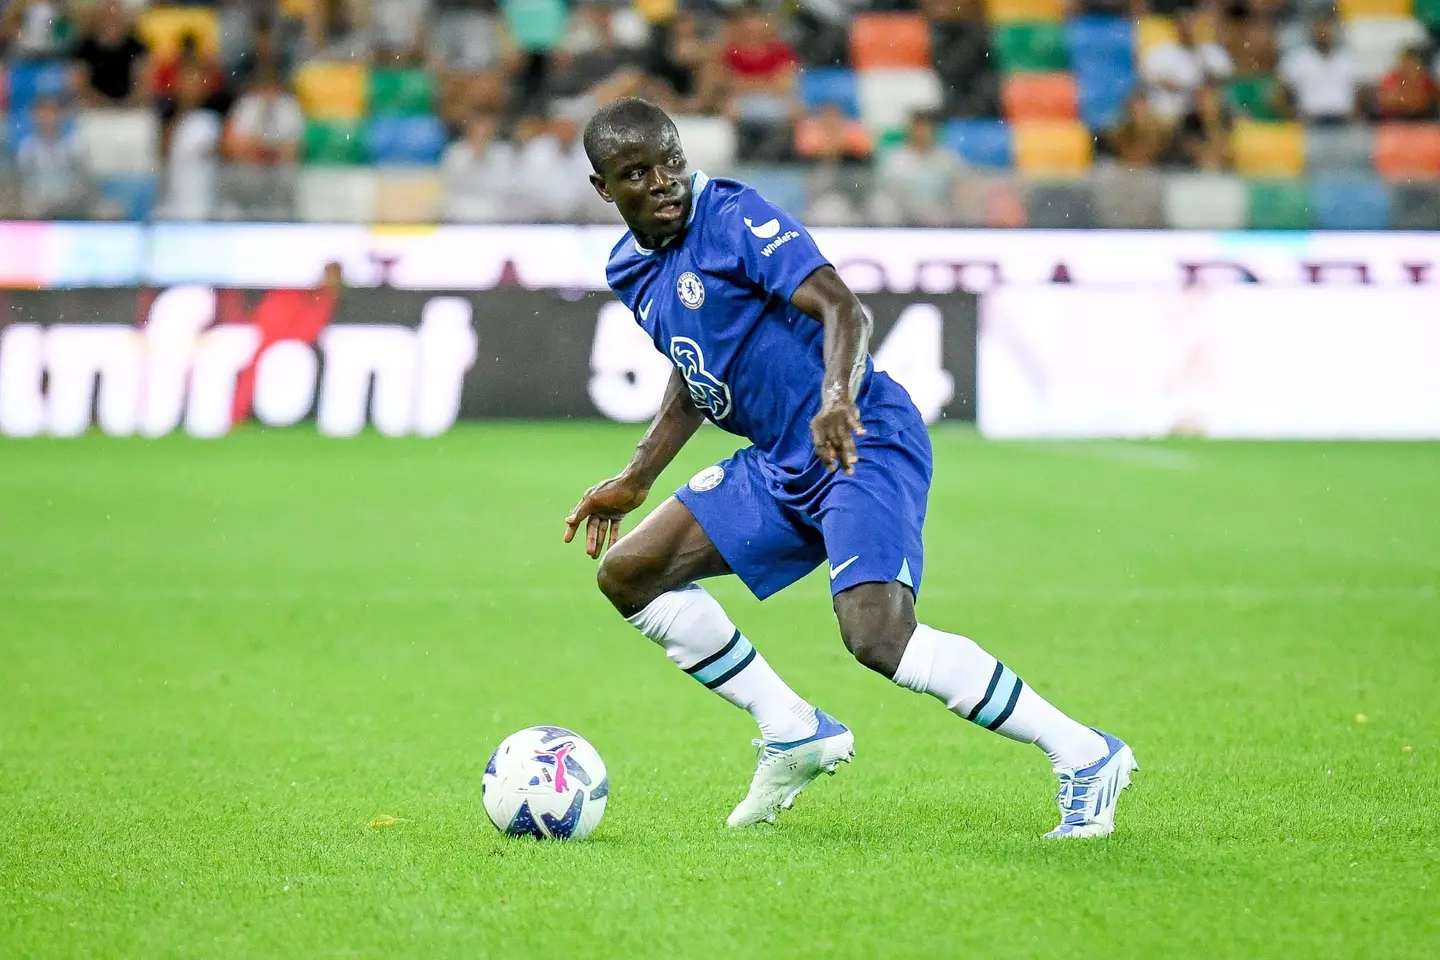 Chelsea's N'Golo Kante portrait in action during Udinese Calcio vs Chelsea FC. (Alamy)